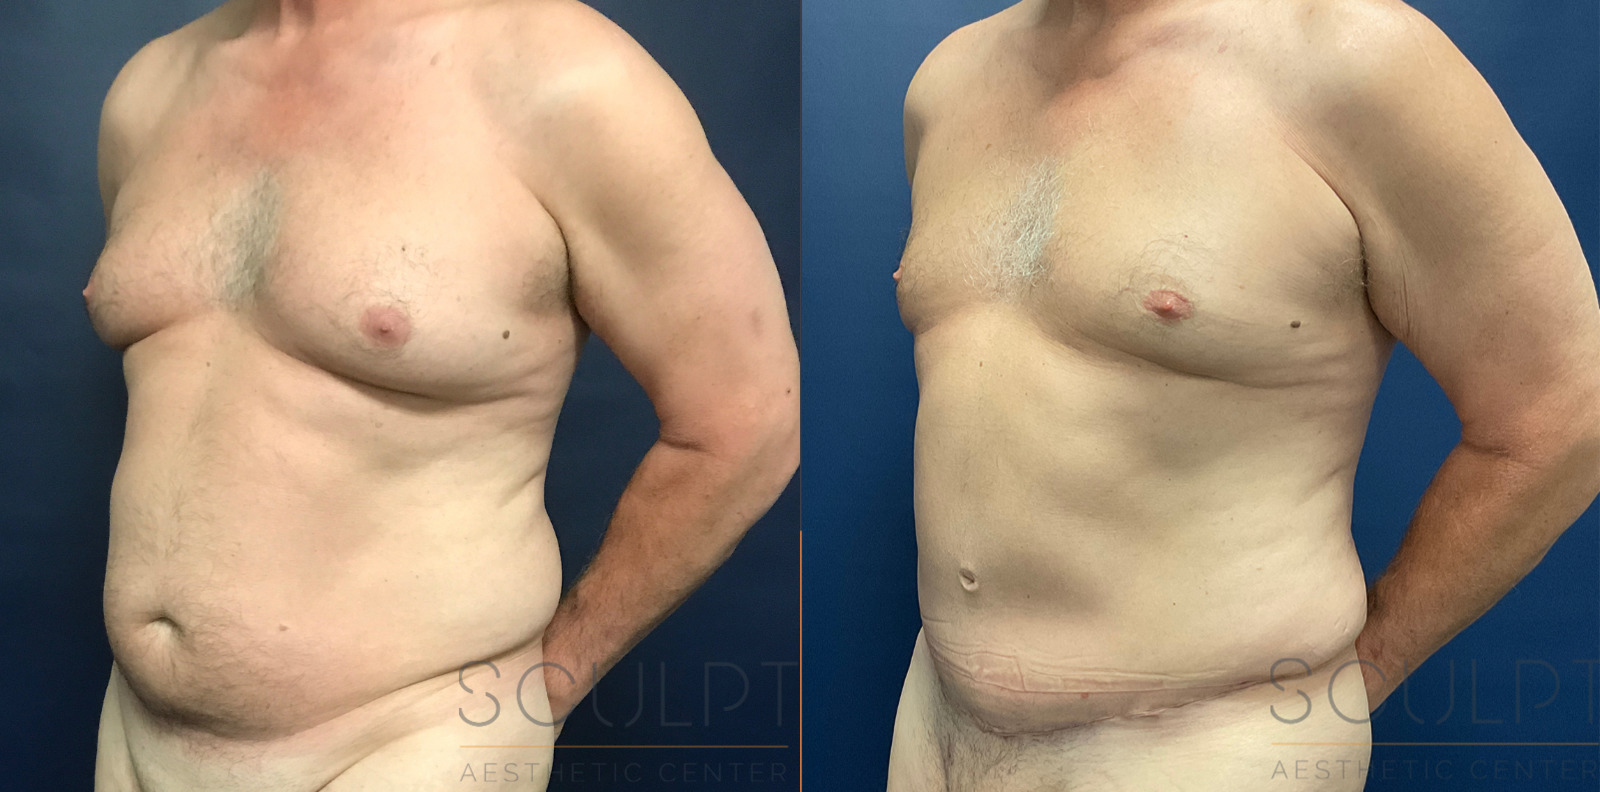 Liposuction to the Abdomen, Chest with Male Tummy Tuck Before and After Photo by Sculpt Aesthetic Center in Frisco, TX